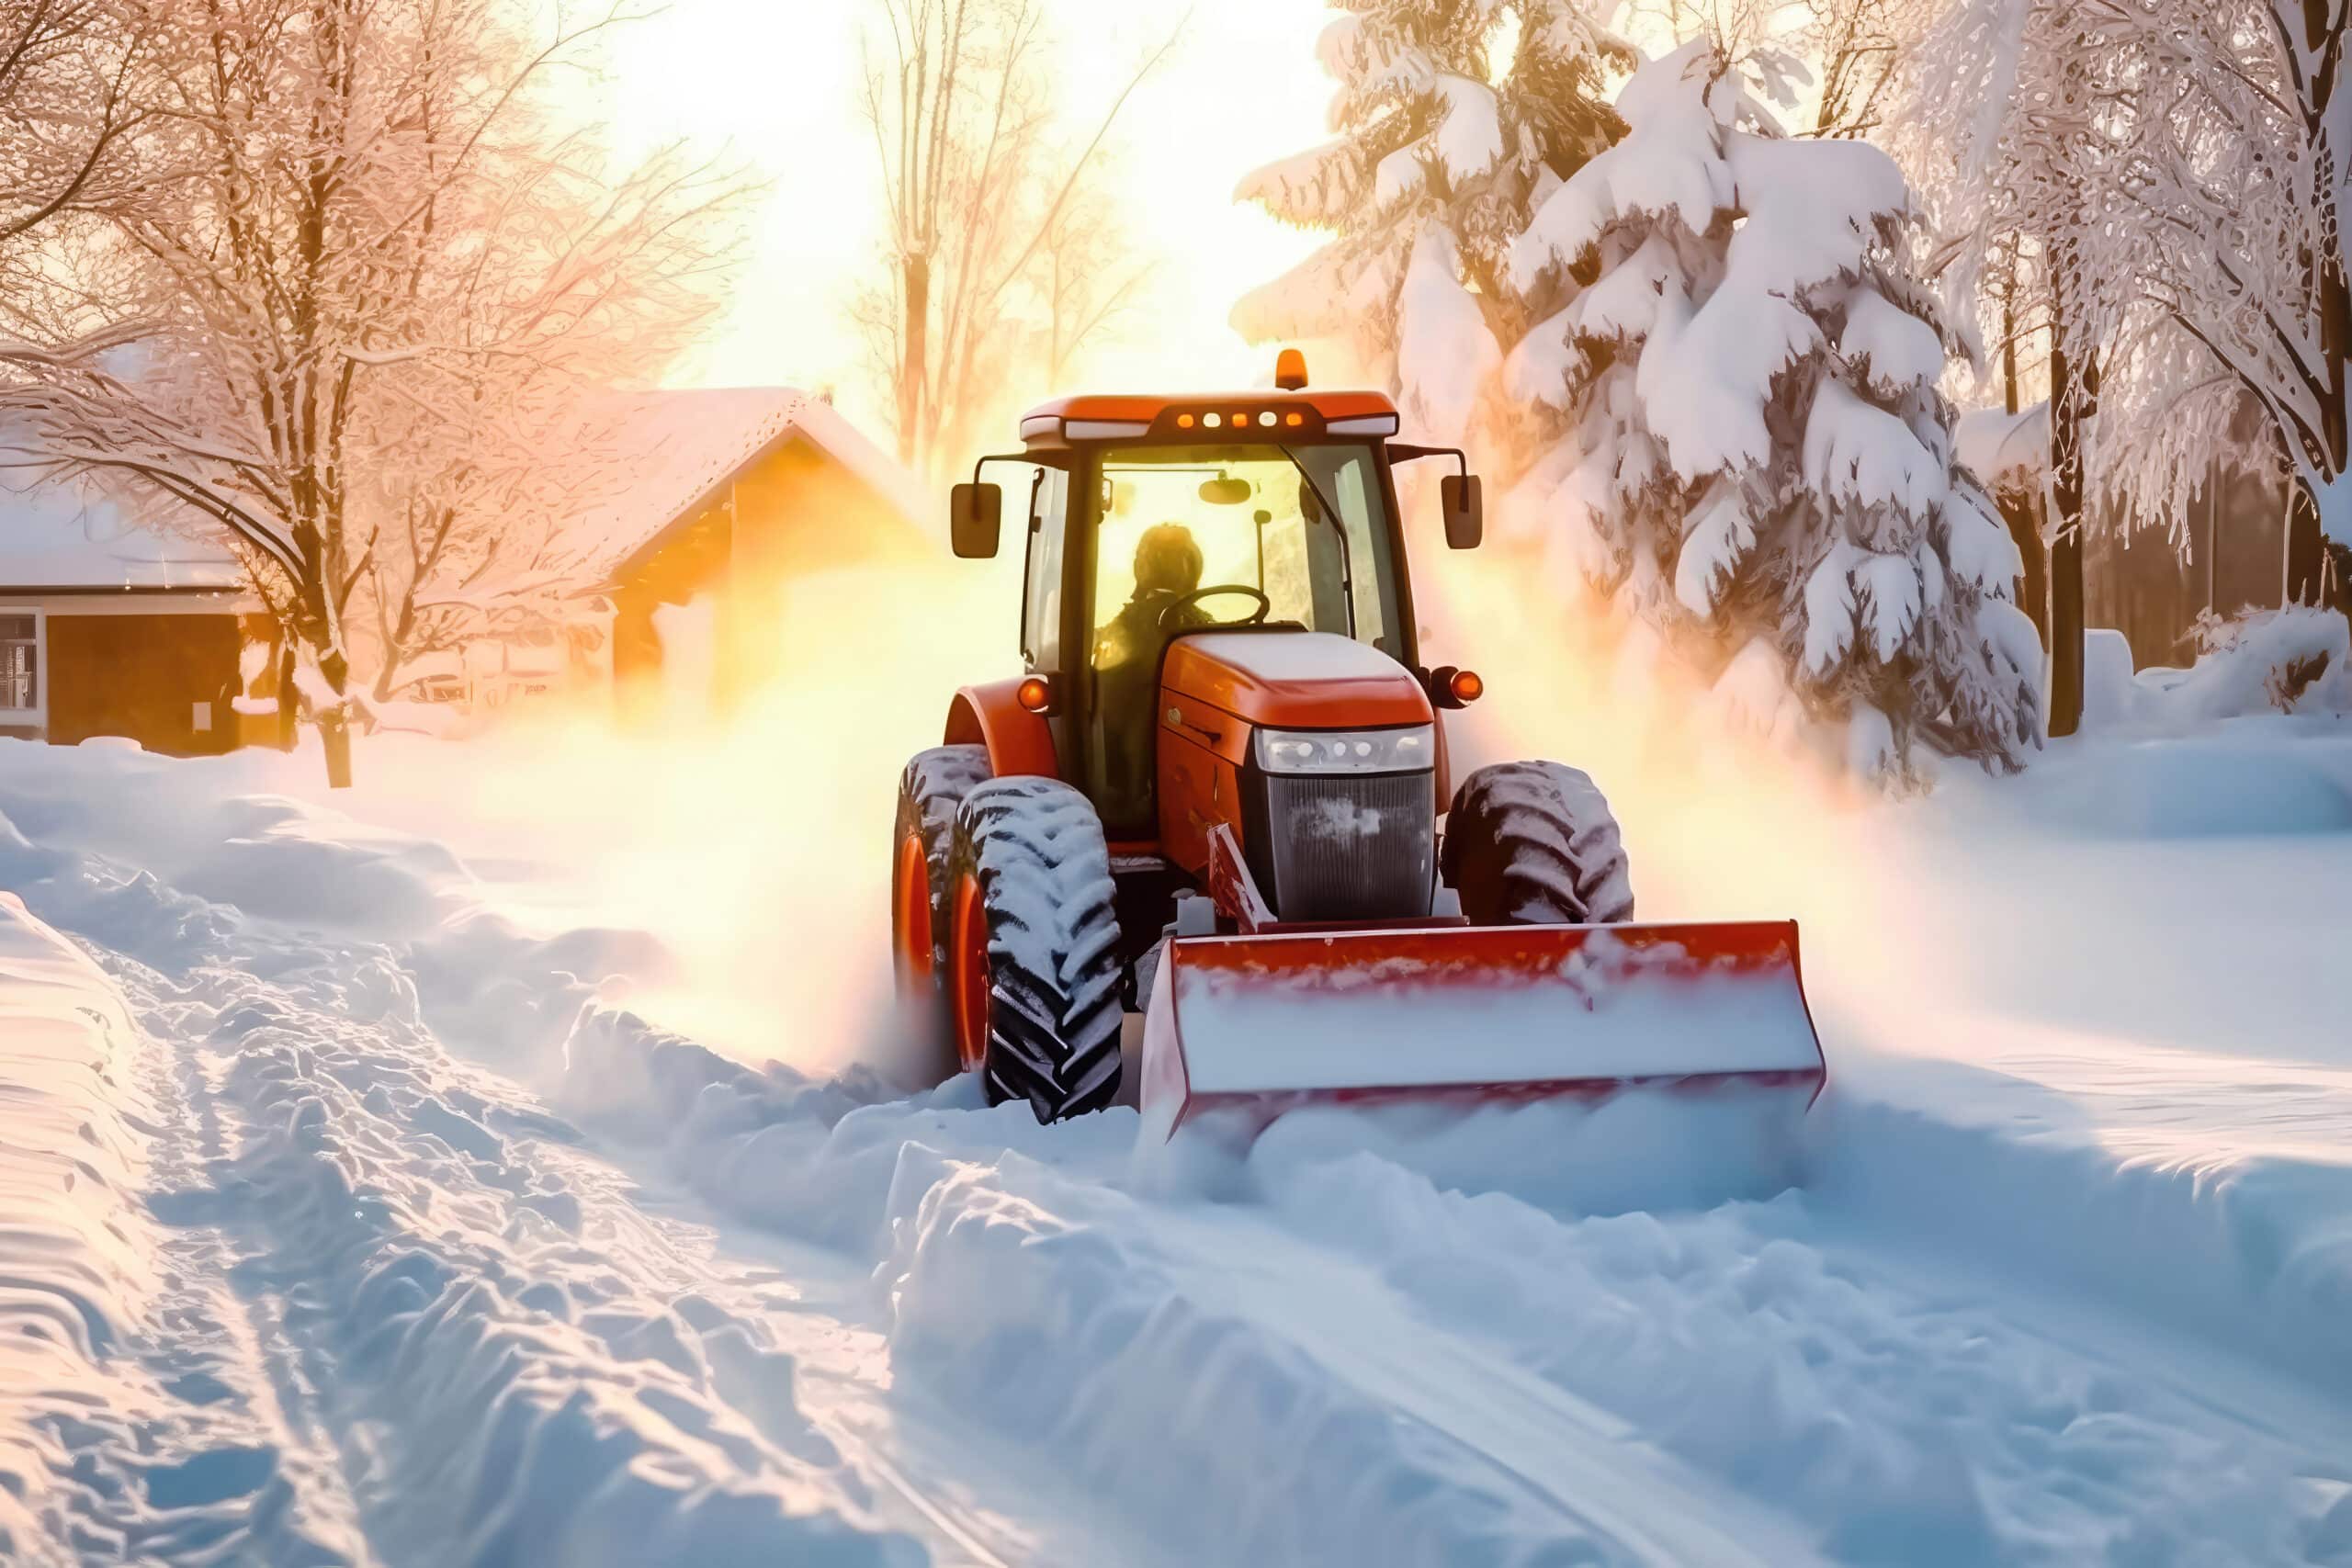 www.appr.com : Who is the maker of Cub Cadet snow blowers?